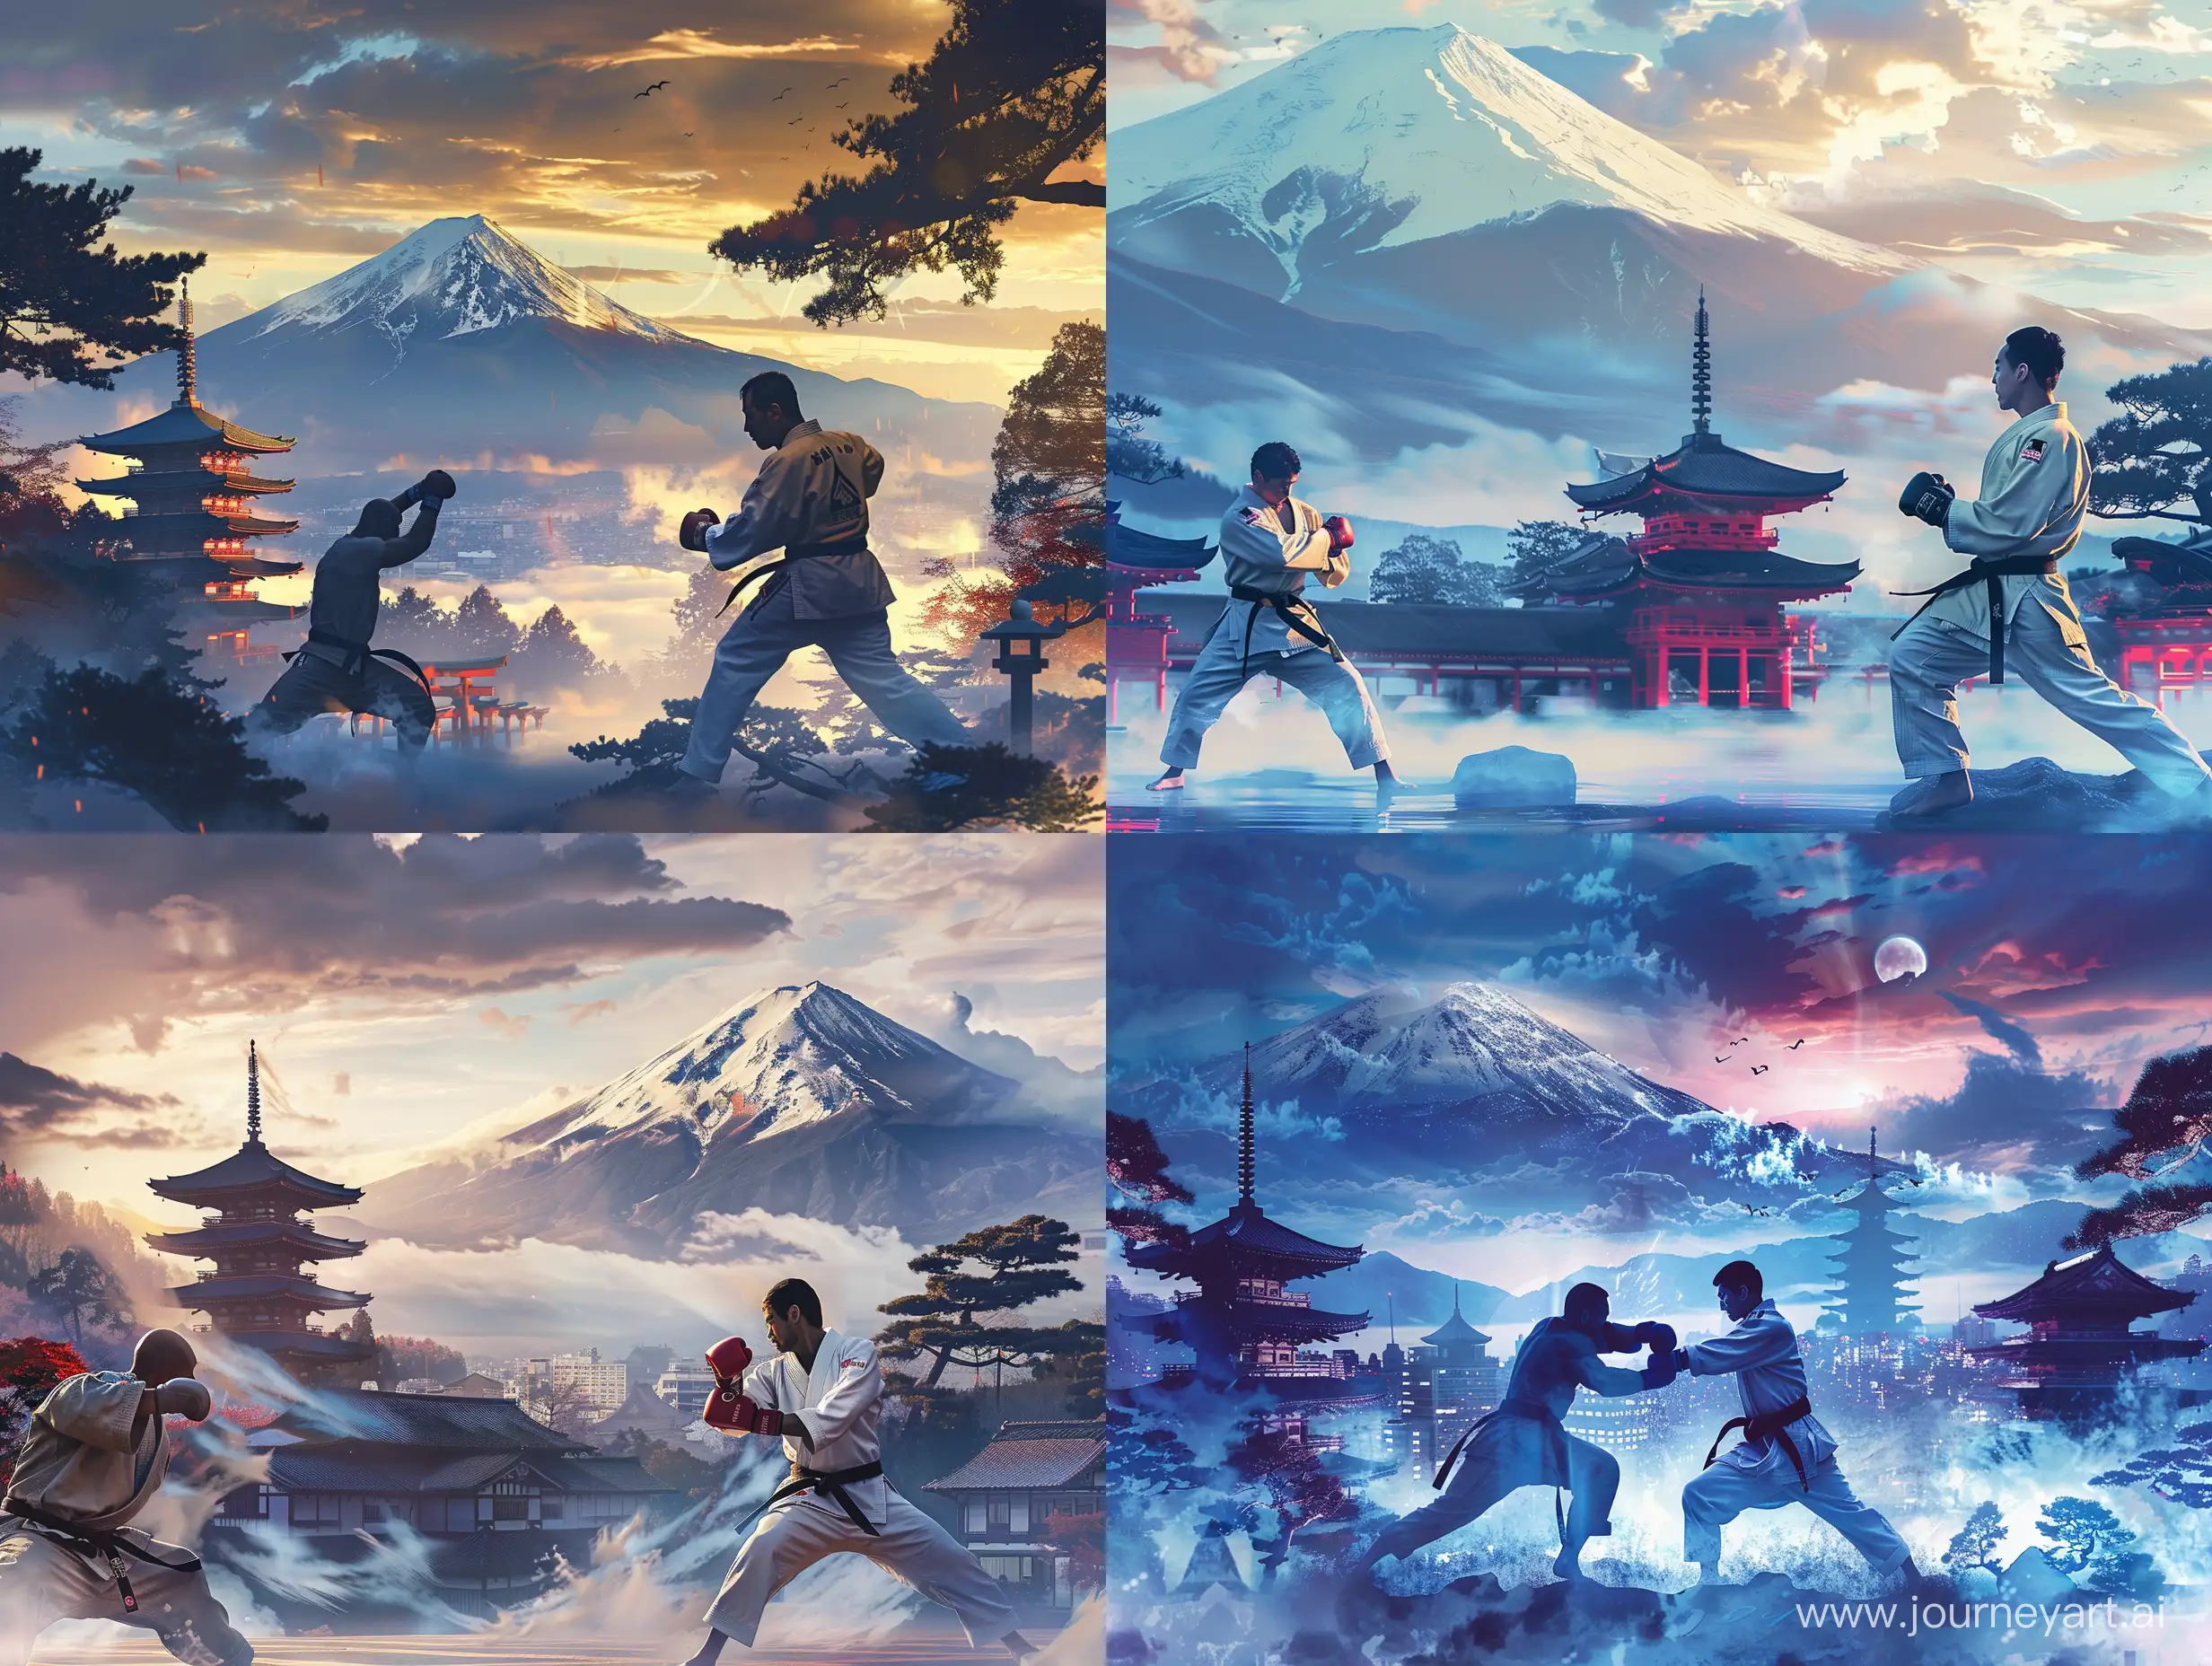 image of a karate fighter fighting with the opponent in the foreground, mountain and traditional japanese buildings in the background, digital art, competition wall banner